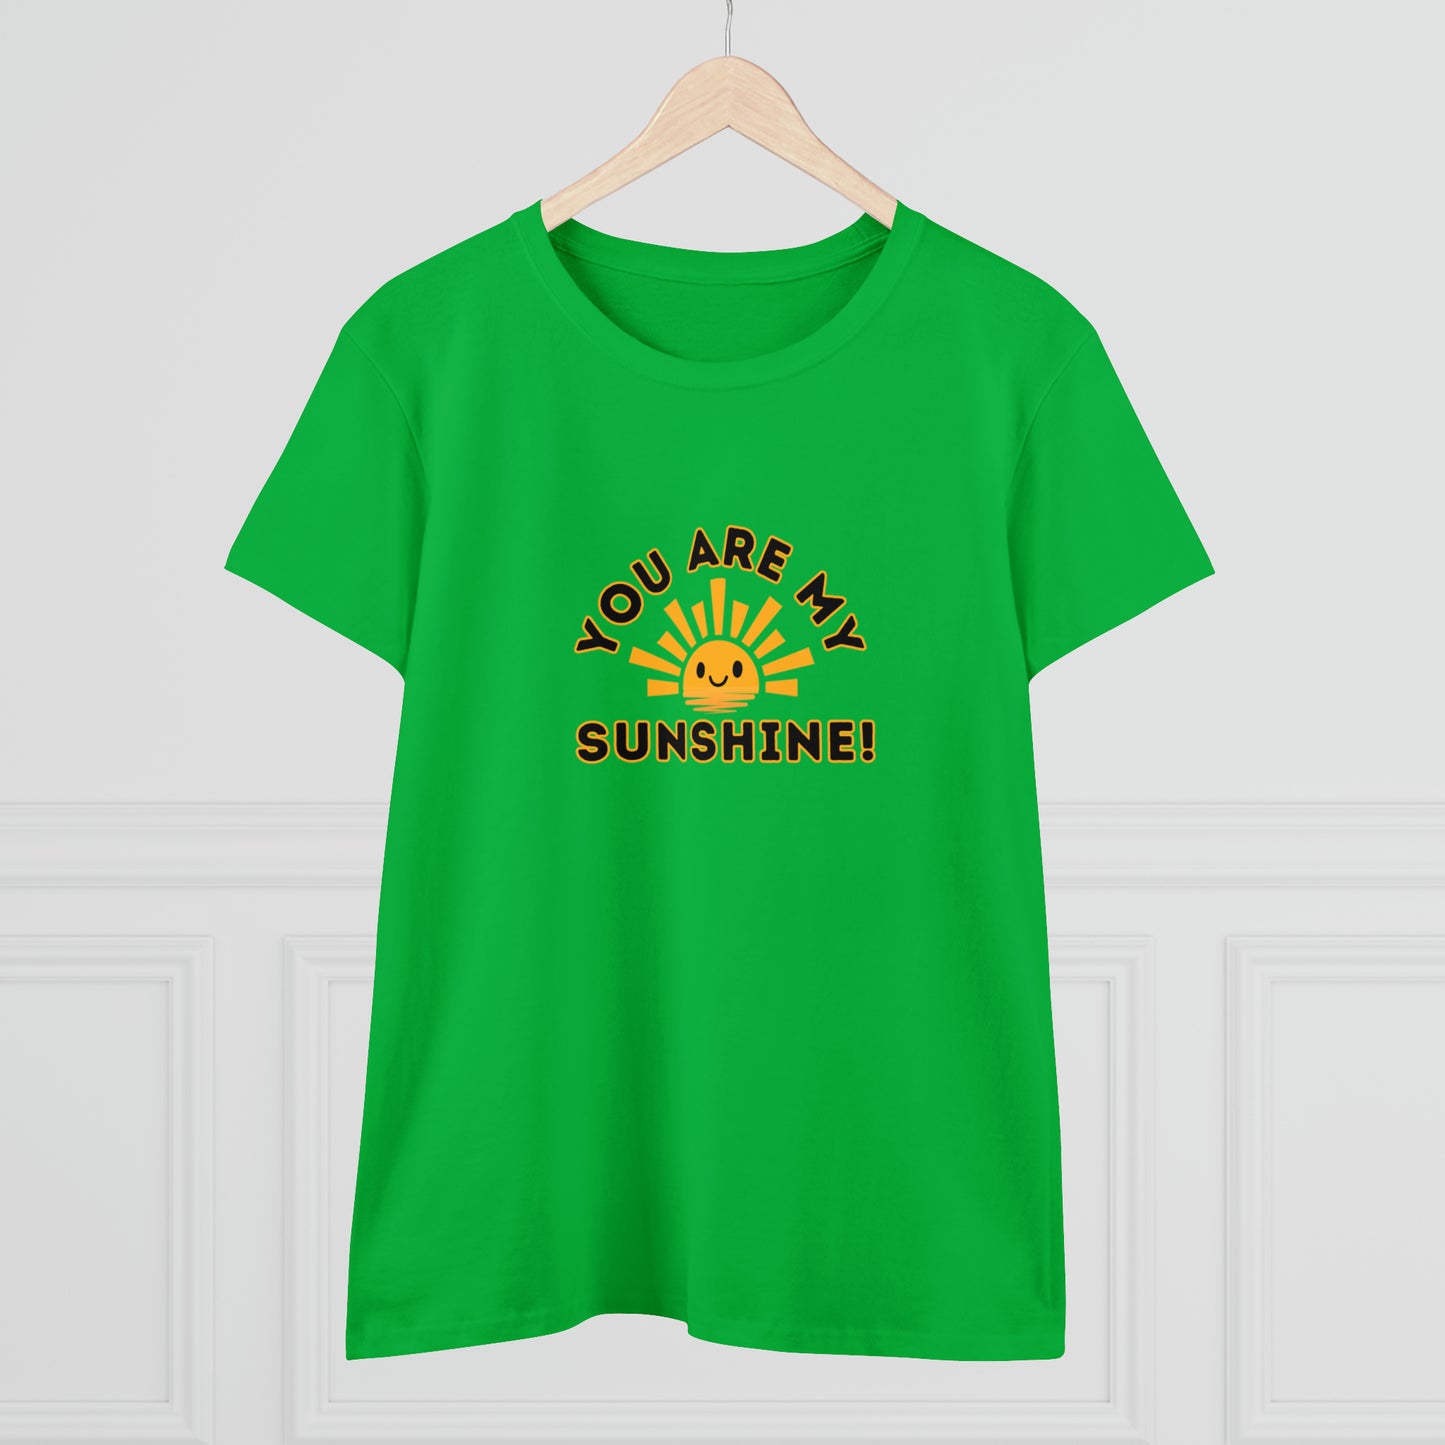 Positive, You Are My Sunshine, Happiness- Adult, Semi-fitted, Smaller Size Image, T-shirt